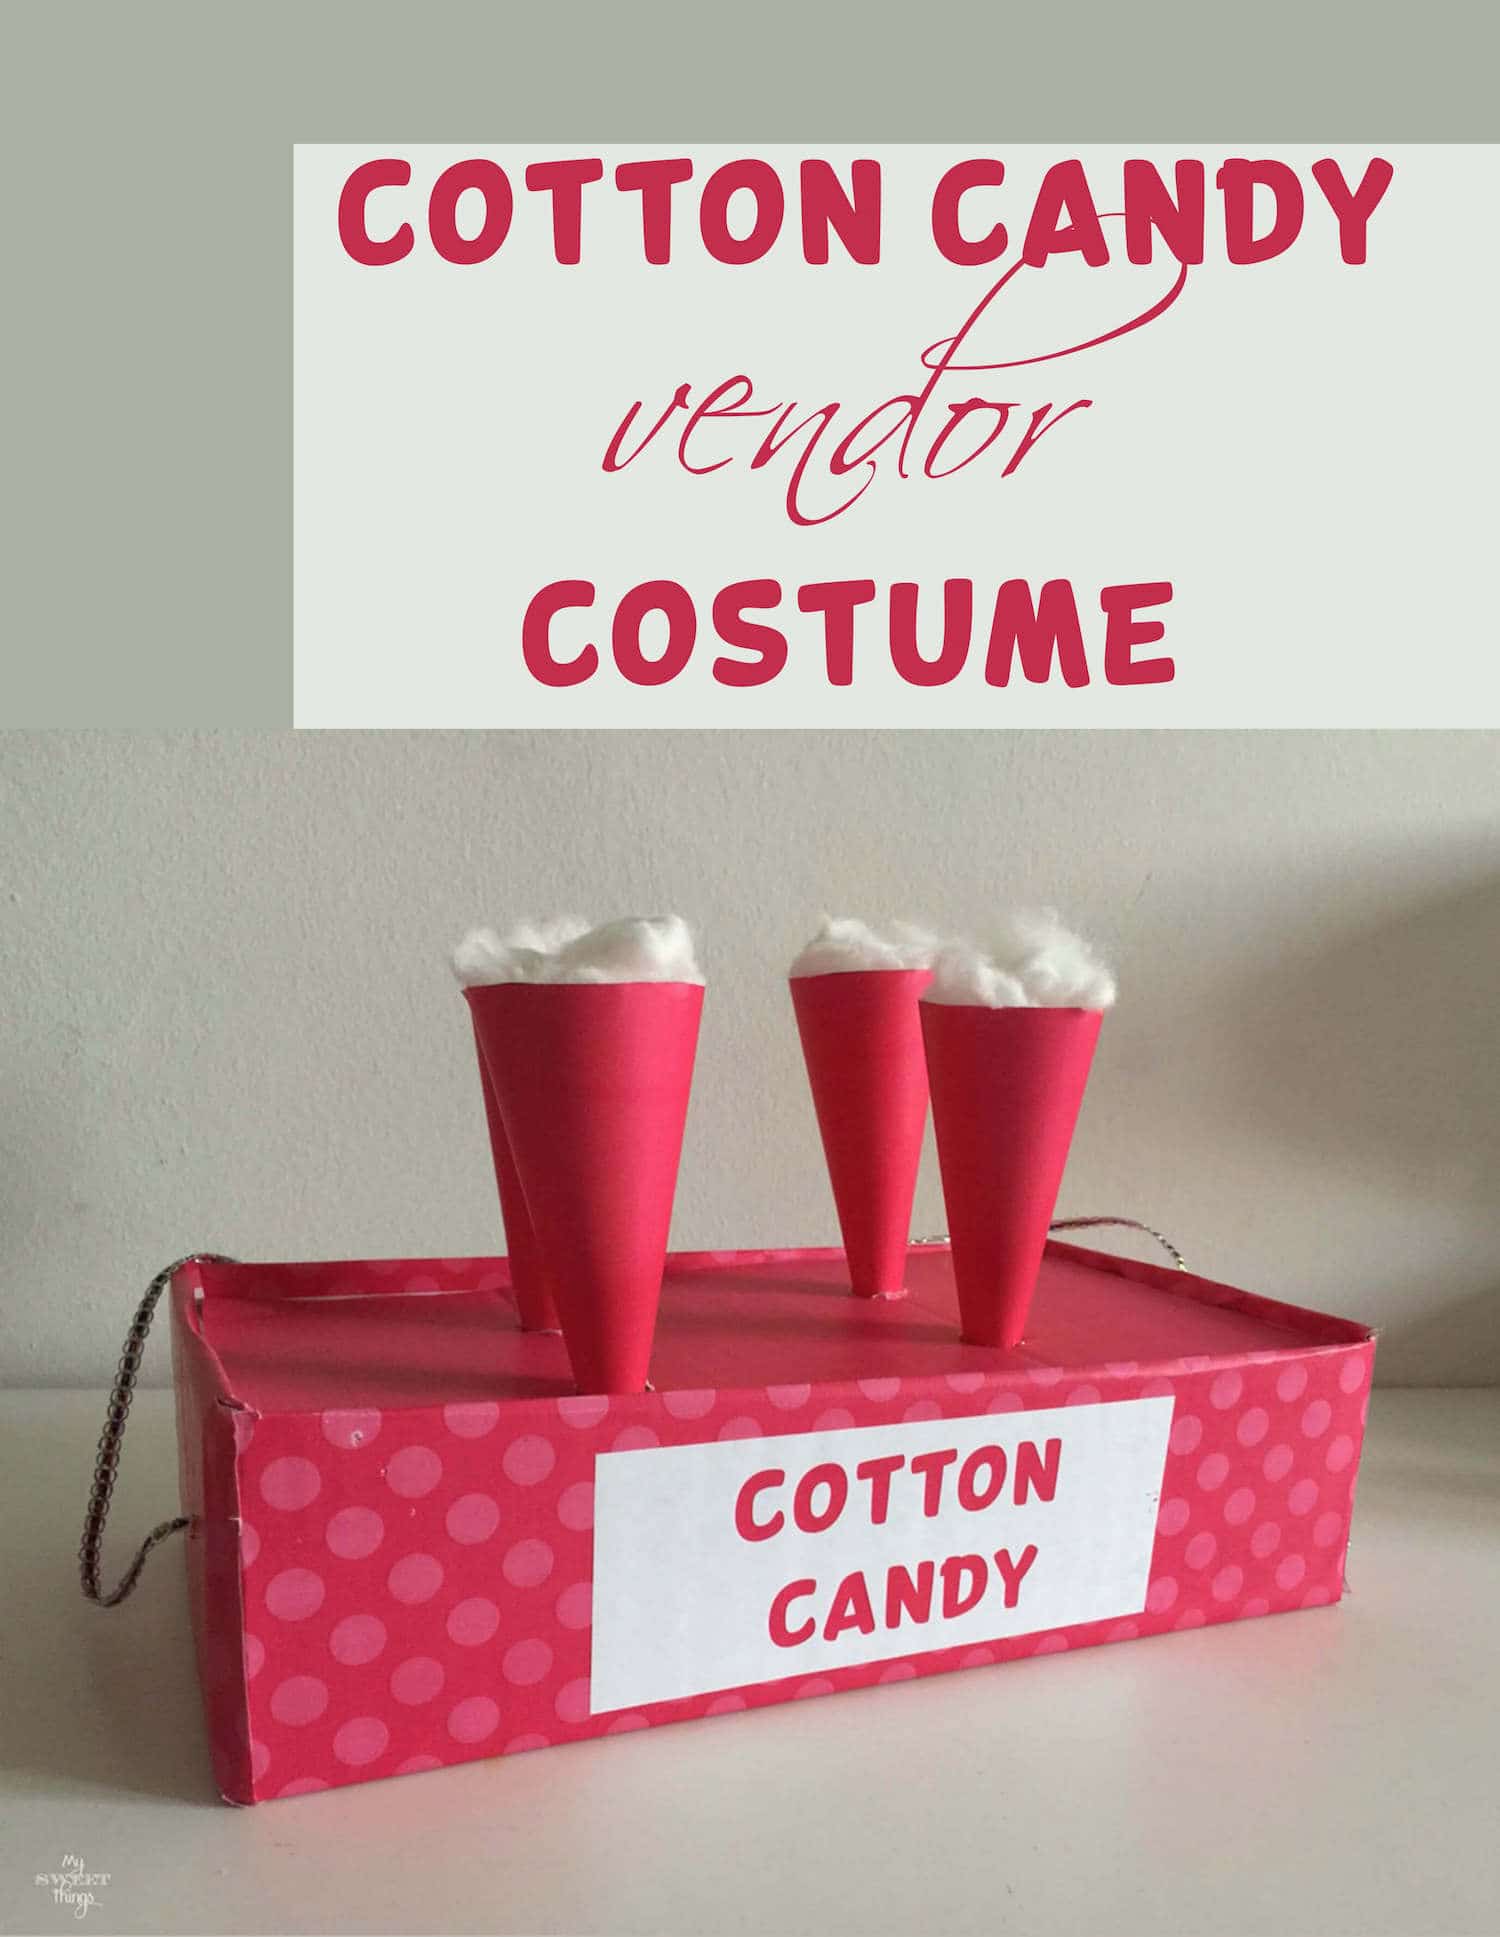 How to make a Cotton Candy Vendor Costume for our Carnival party